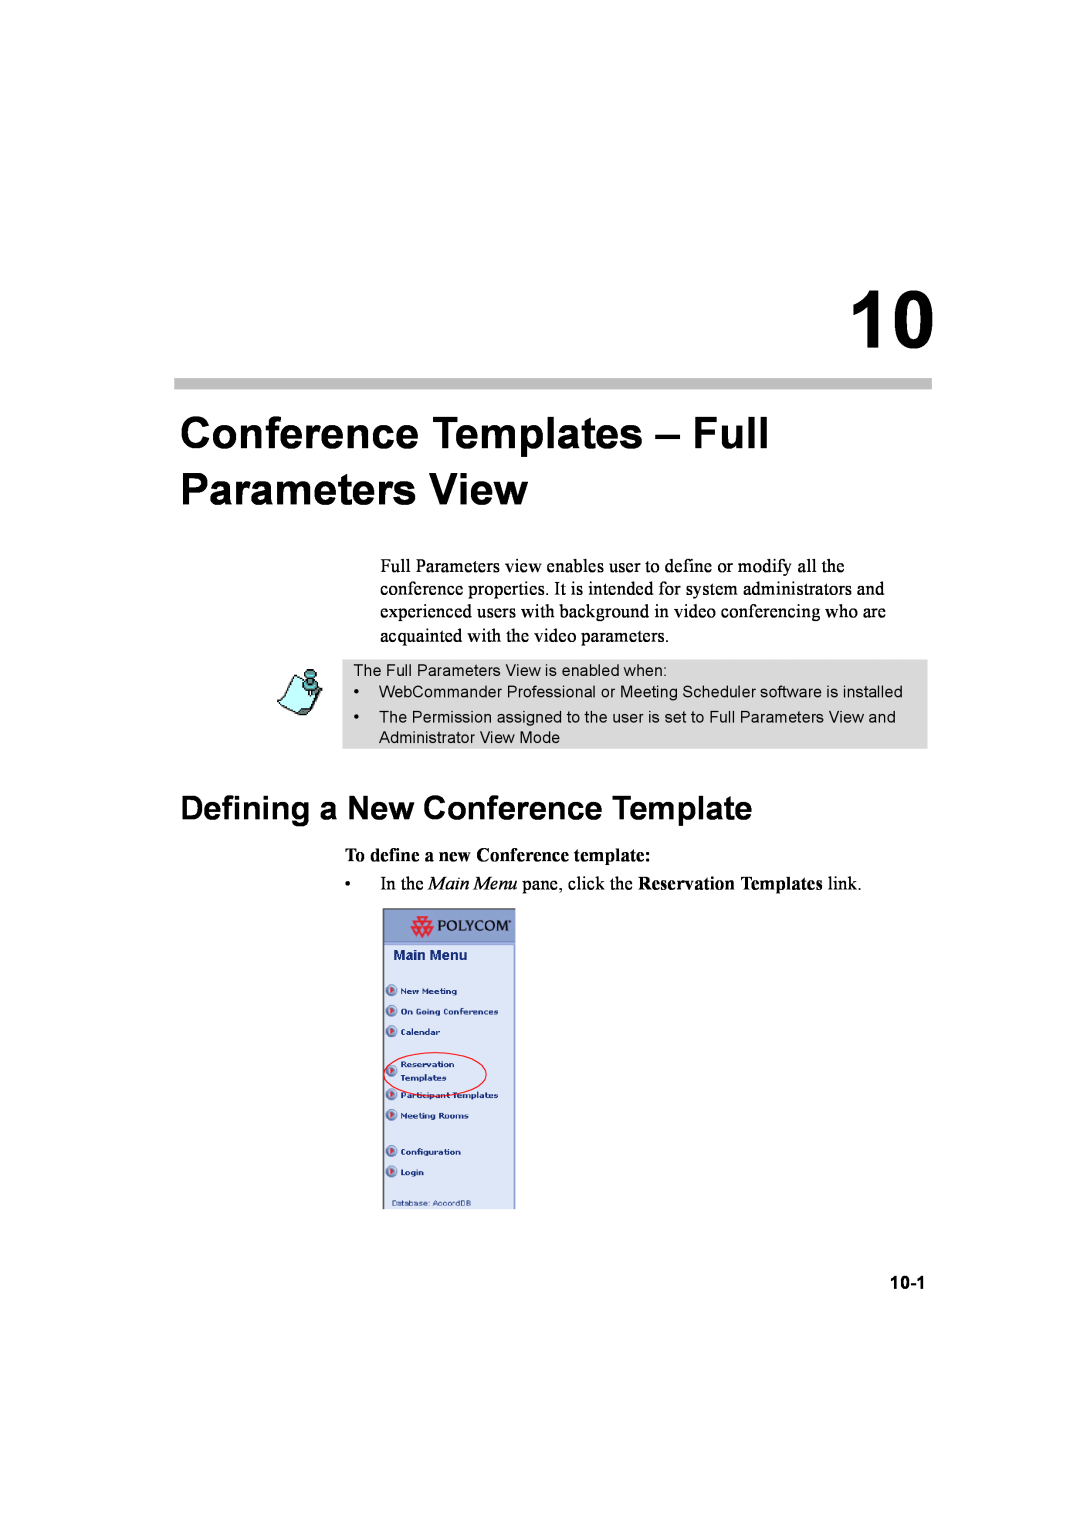 Polycom 8 manual Conference Templates – Full Parameters View, Defining a New Conference Template 